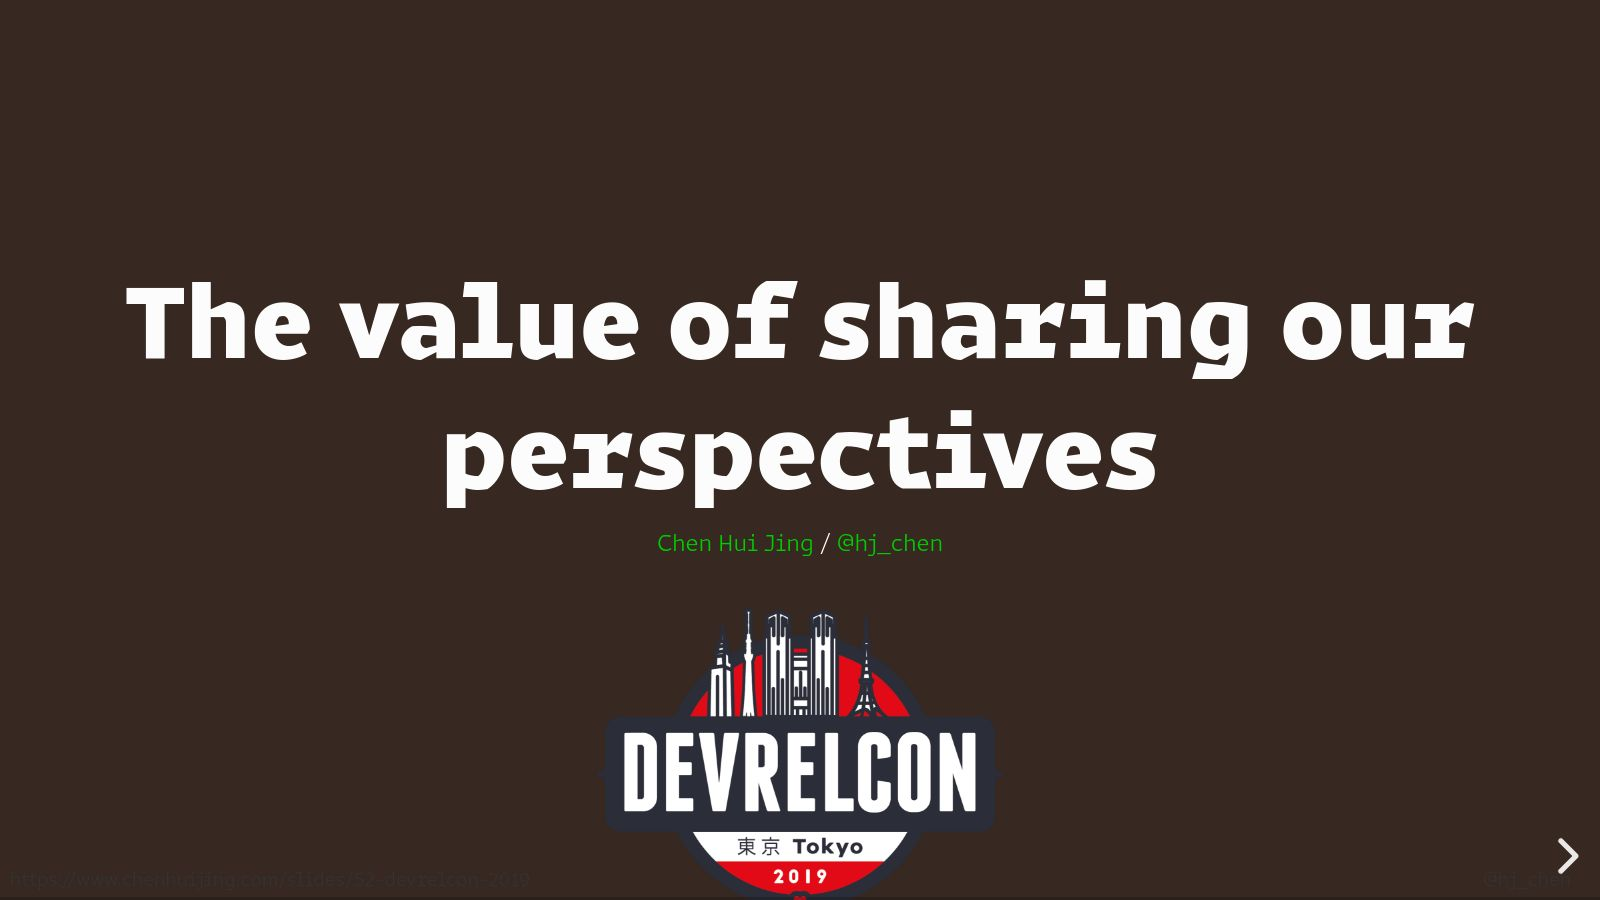 The value of sharing our perspectives